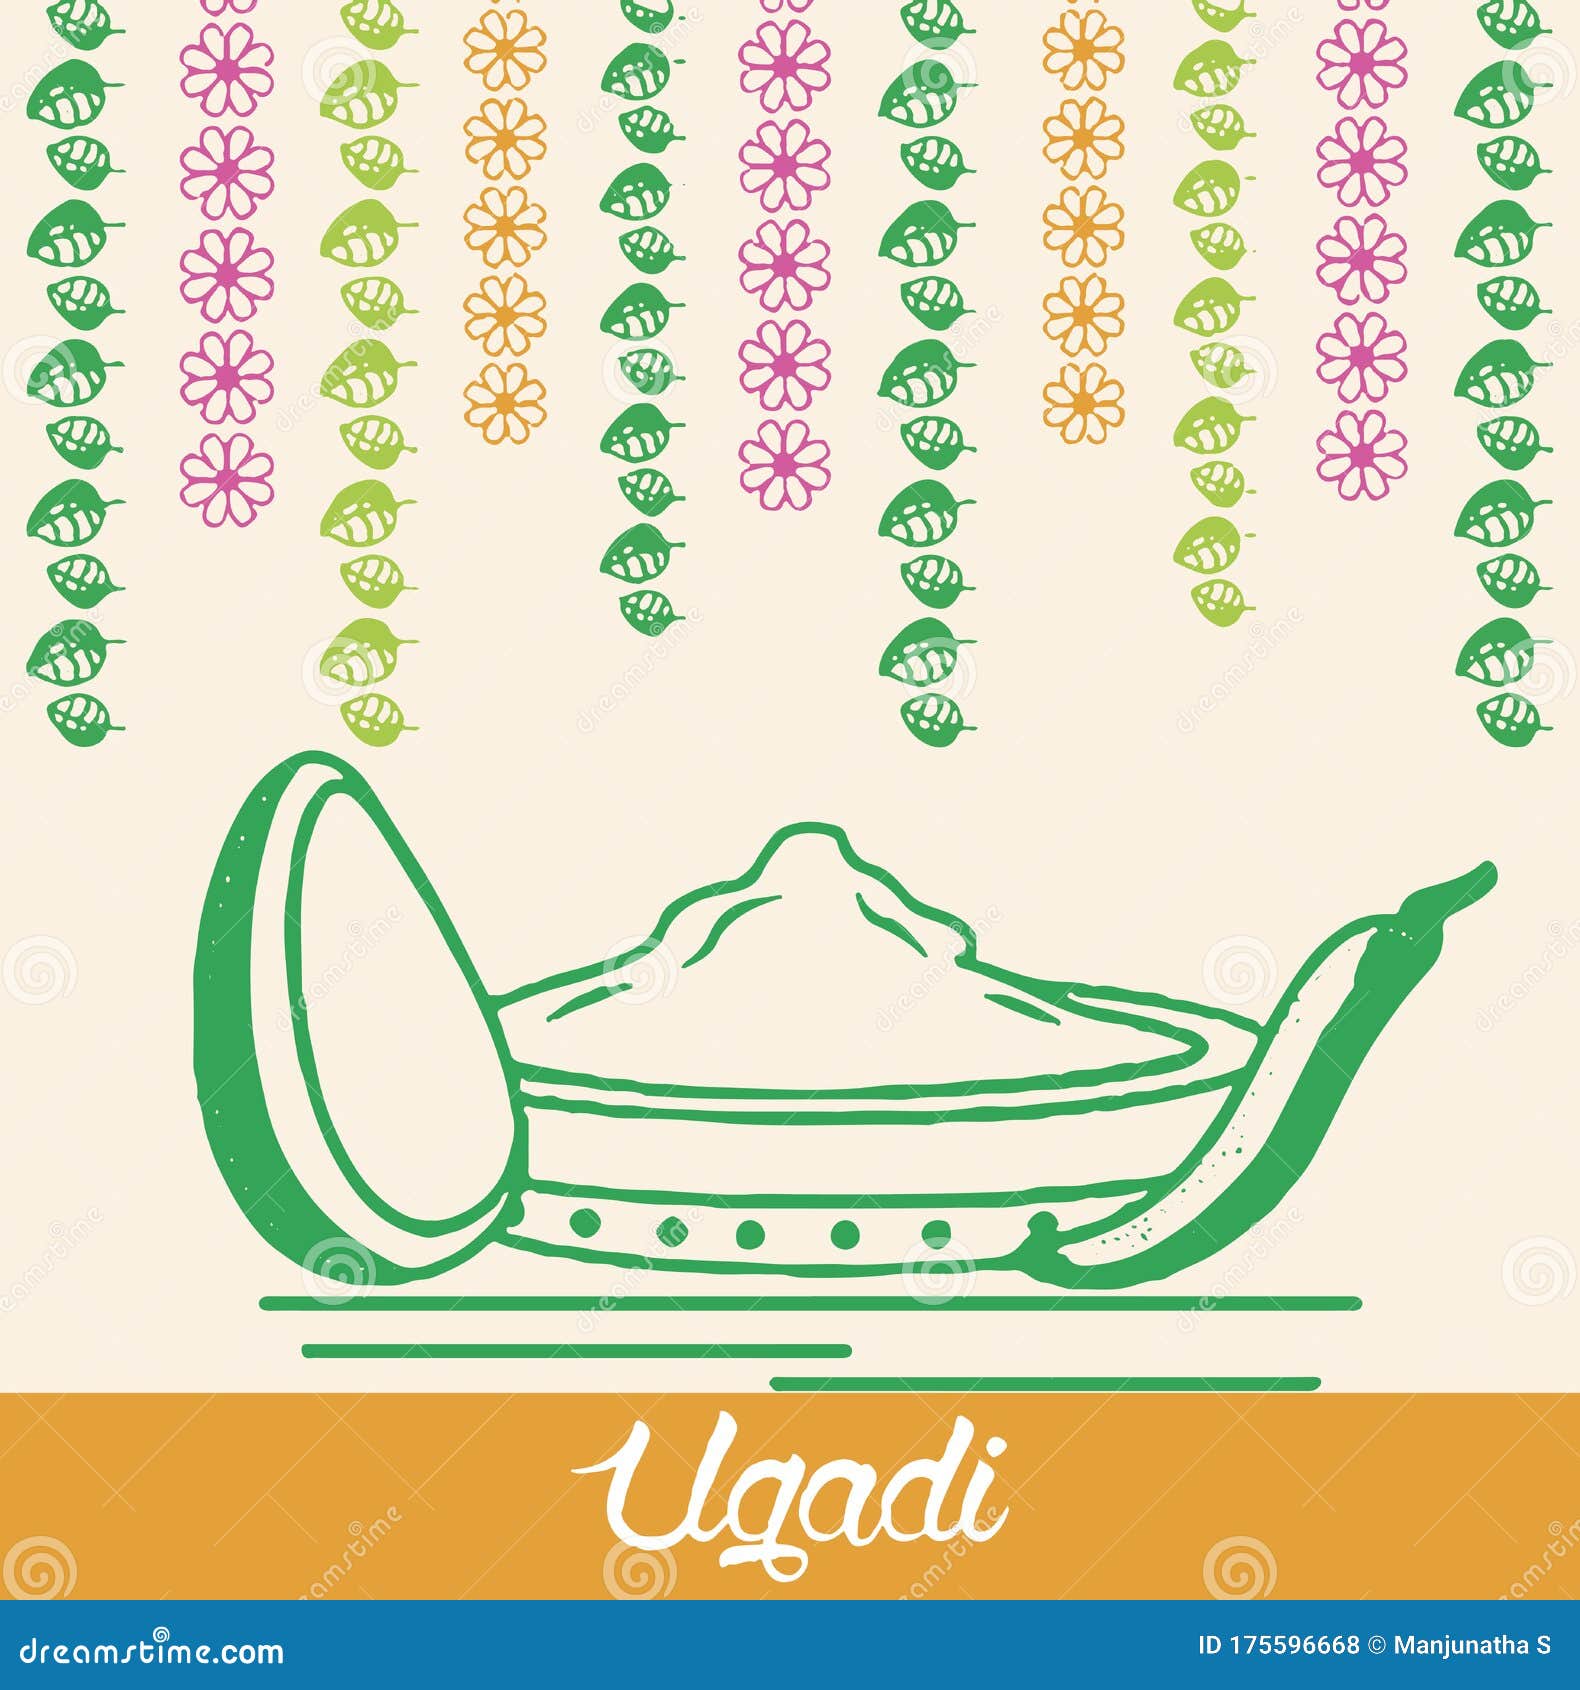 Banner Design Of Indian New Year Ugadi Festival